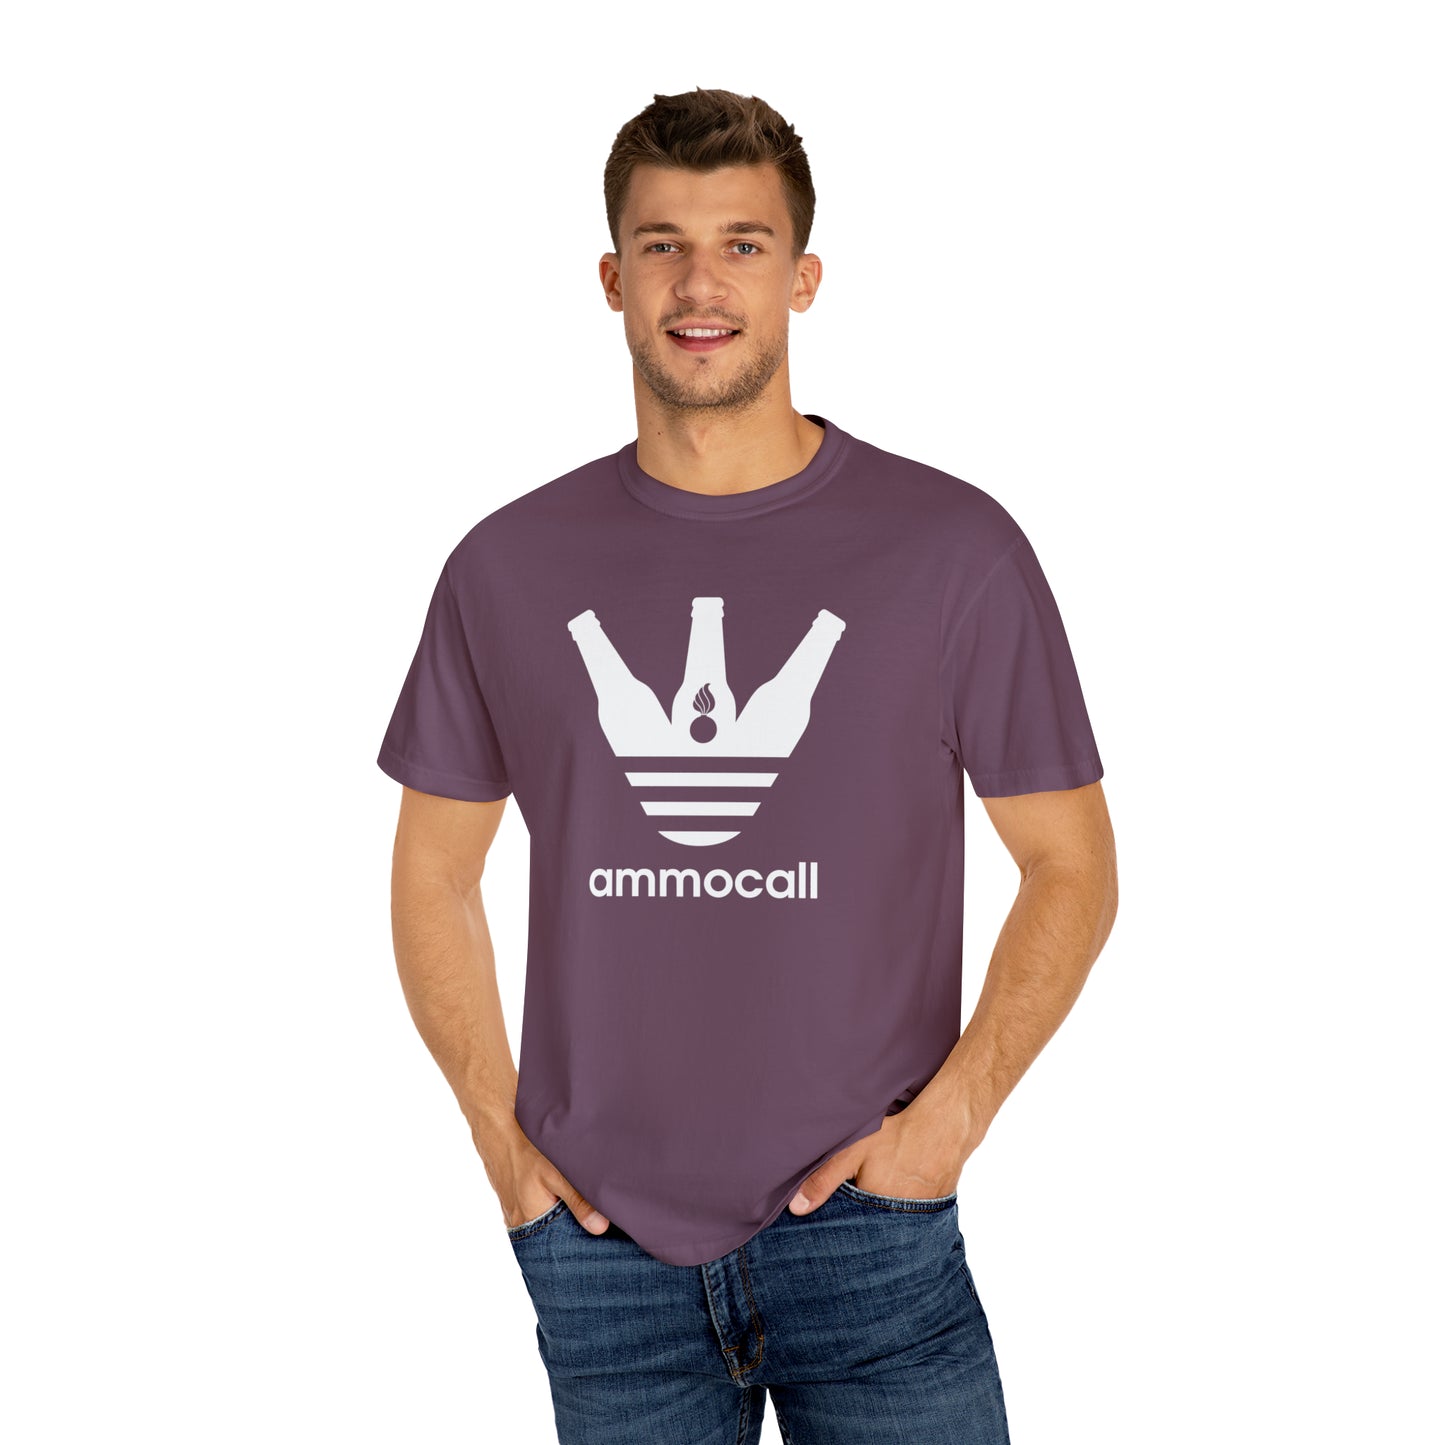 AMMO Call Three Beer Bottles With A Pisspot and Three Stripes Parody Logo Unisex Garment-Dyed T-shirt